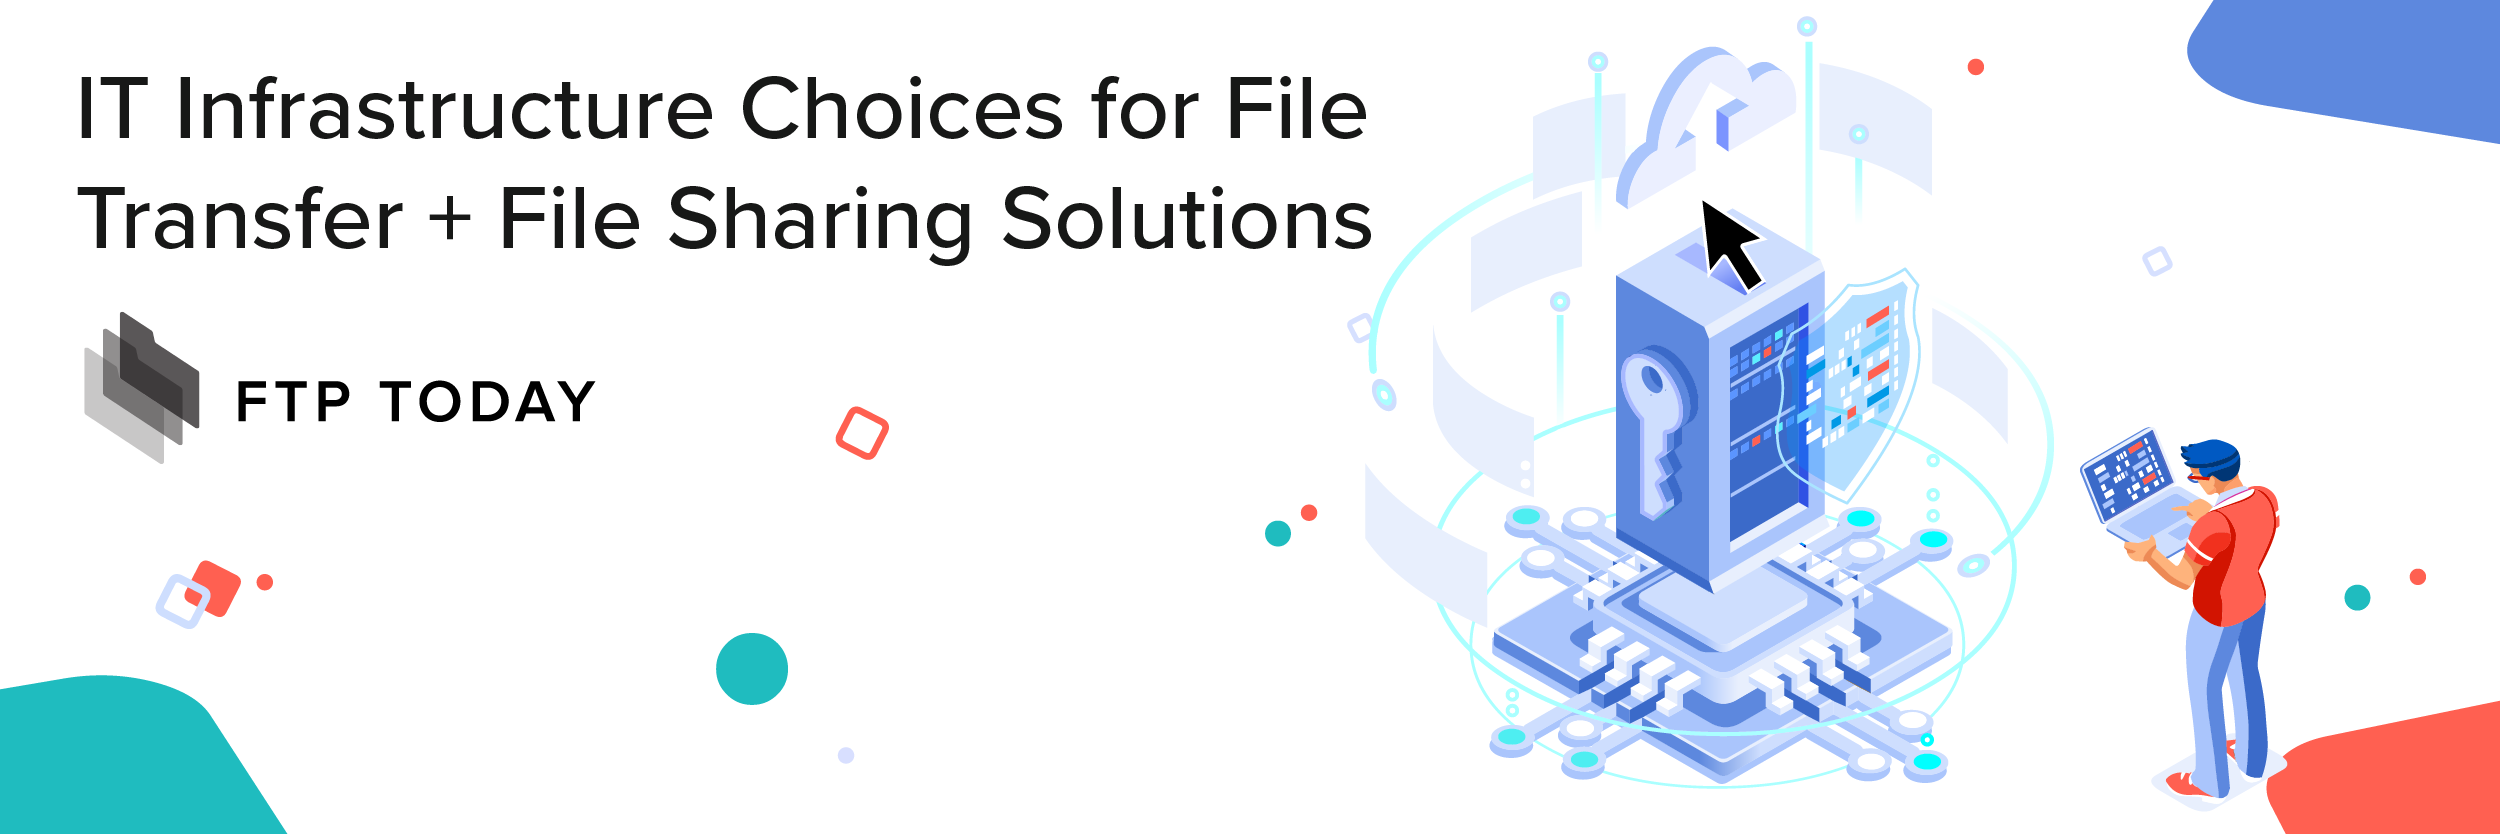 IT Infrastructure Choices for File Transfer + File Sharing Solutions